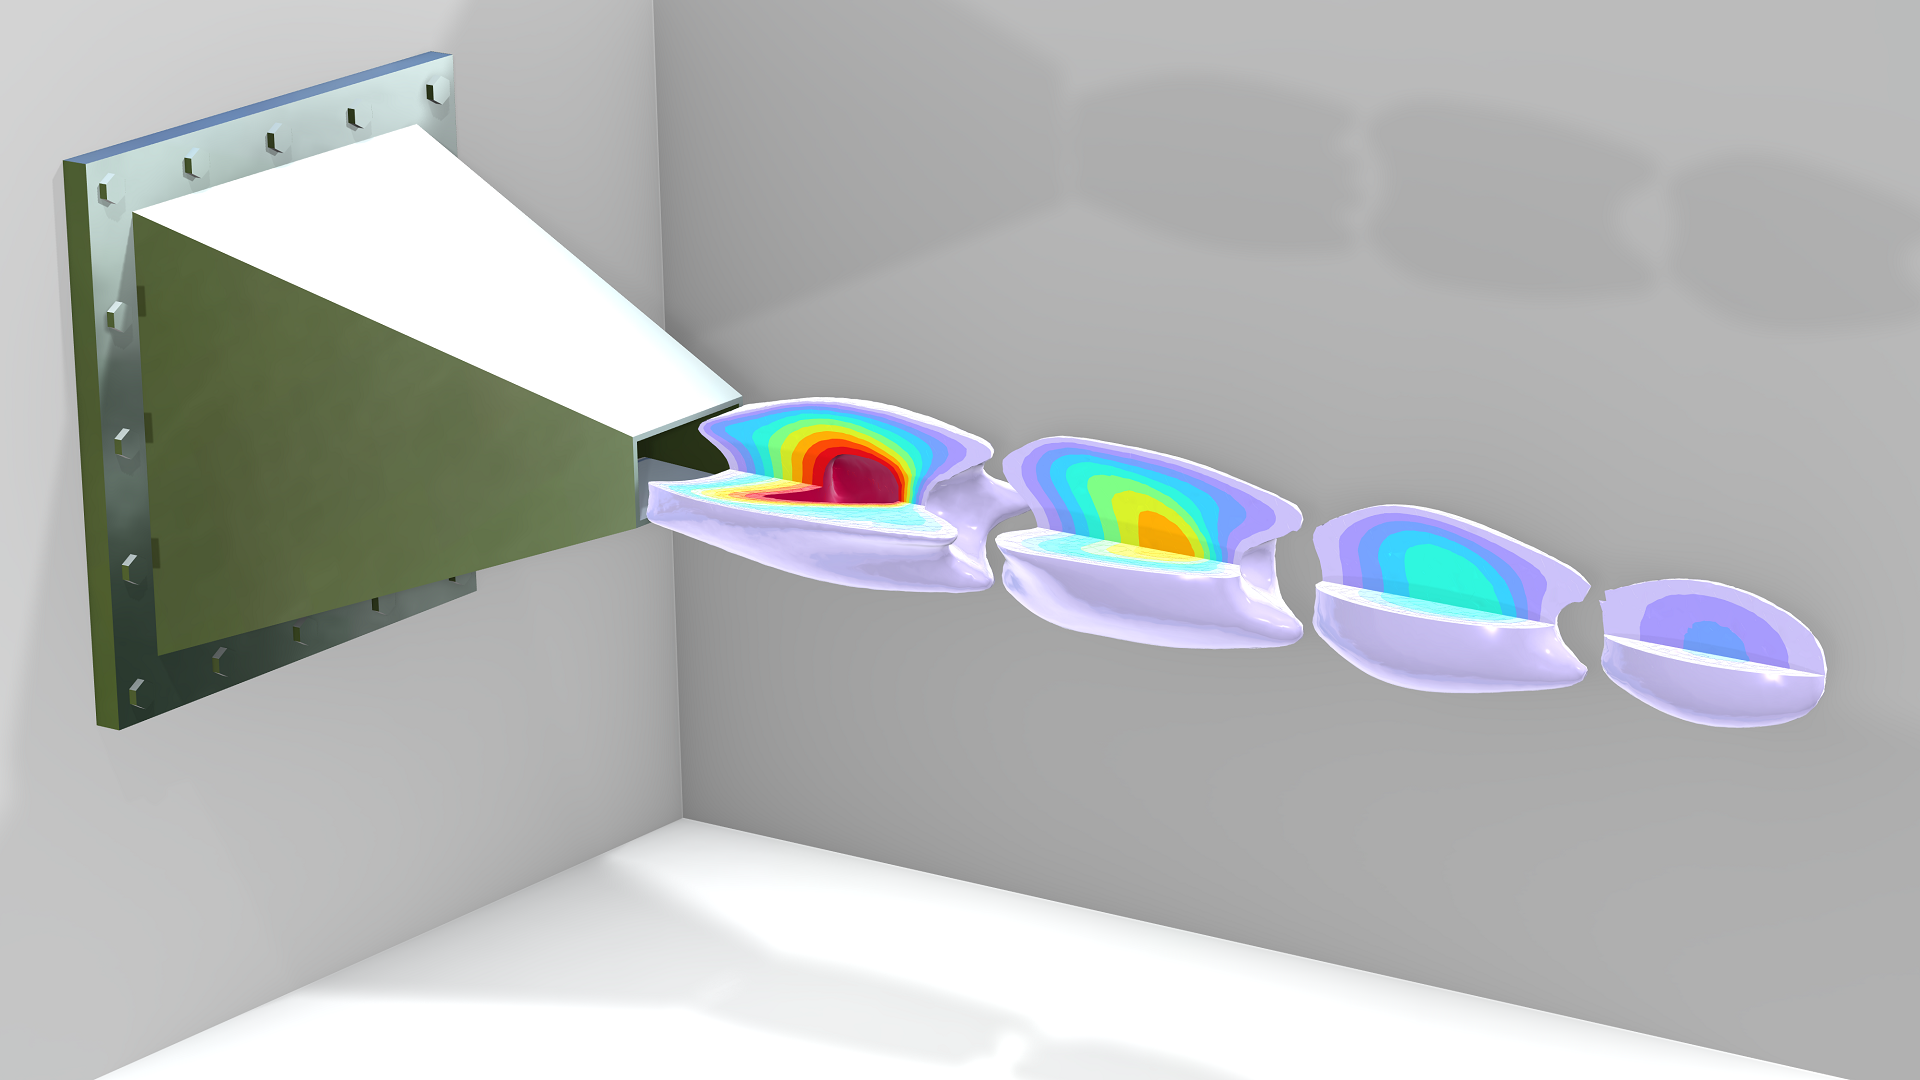 title="" alt=" A model of a ramjet nozzle and its flow, shown with isosurface plots in the Prism color table.